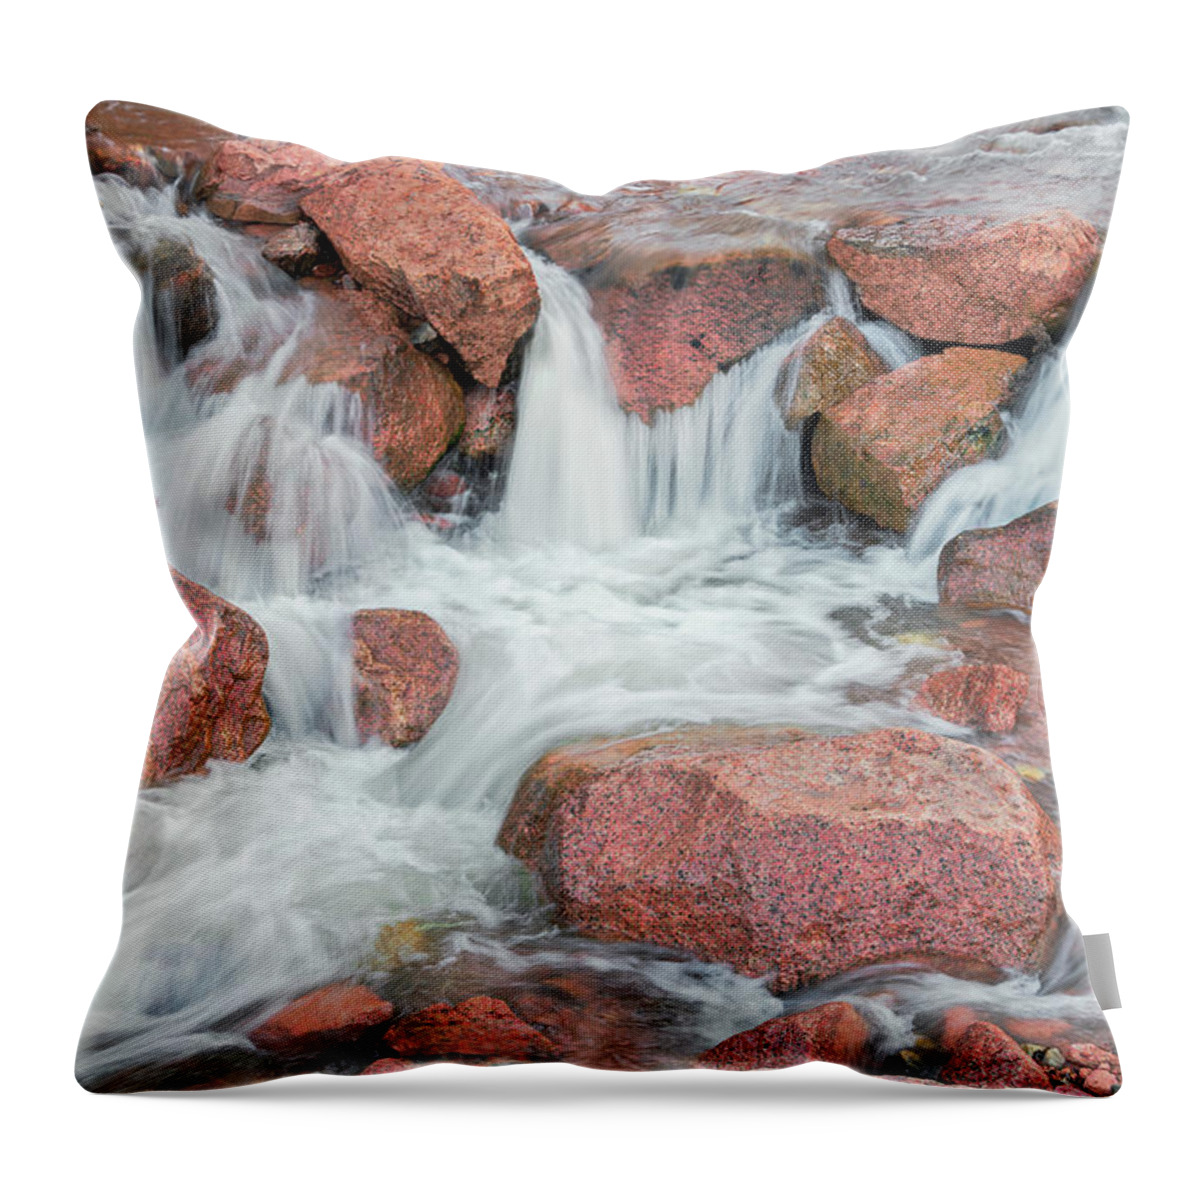 Fountain Creek Throw Pillow featuring the photograph Limpid Liquid, Empty Your Mind, Be Formless And Shapeless Like Water. by Bijan Pirnia